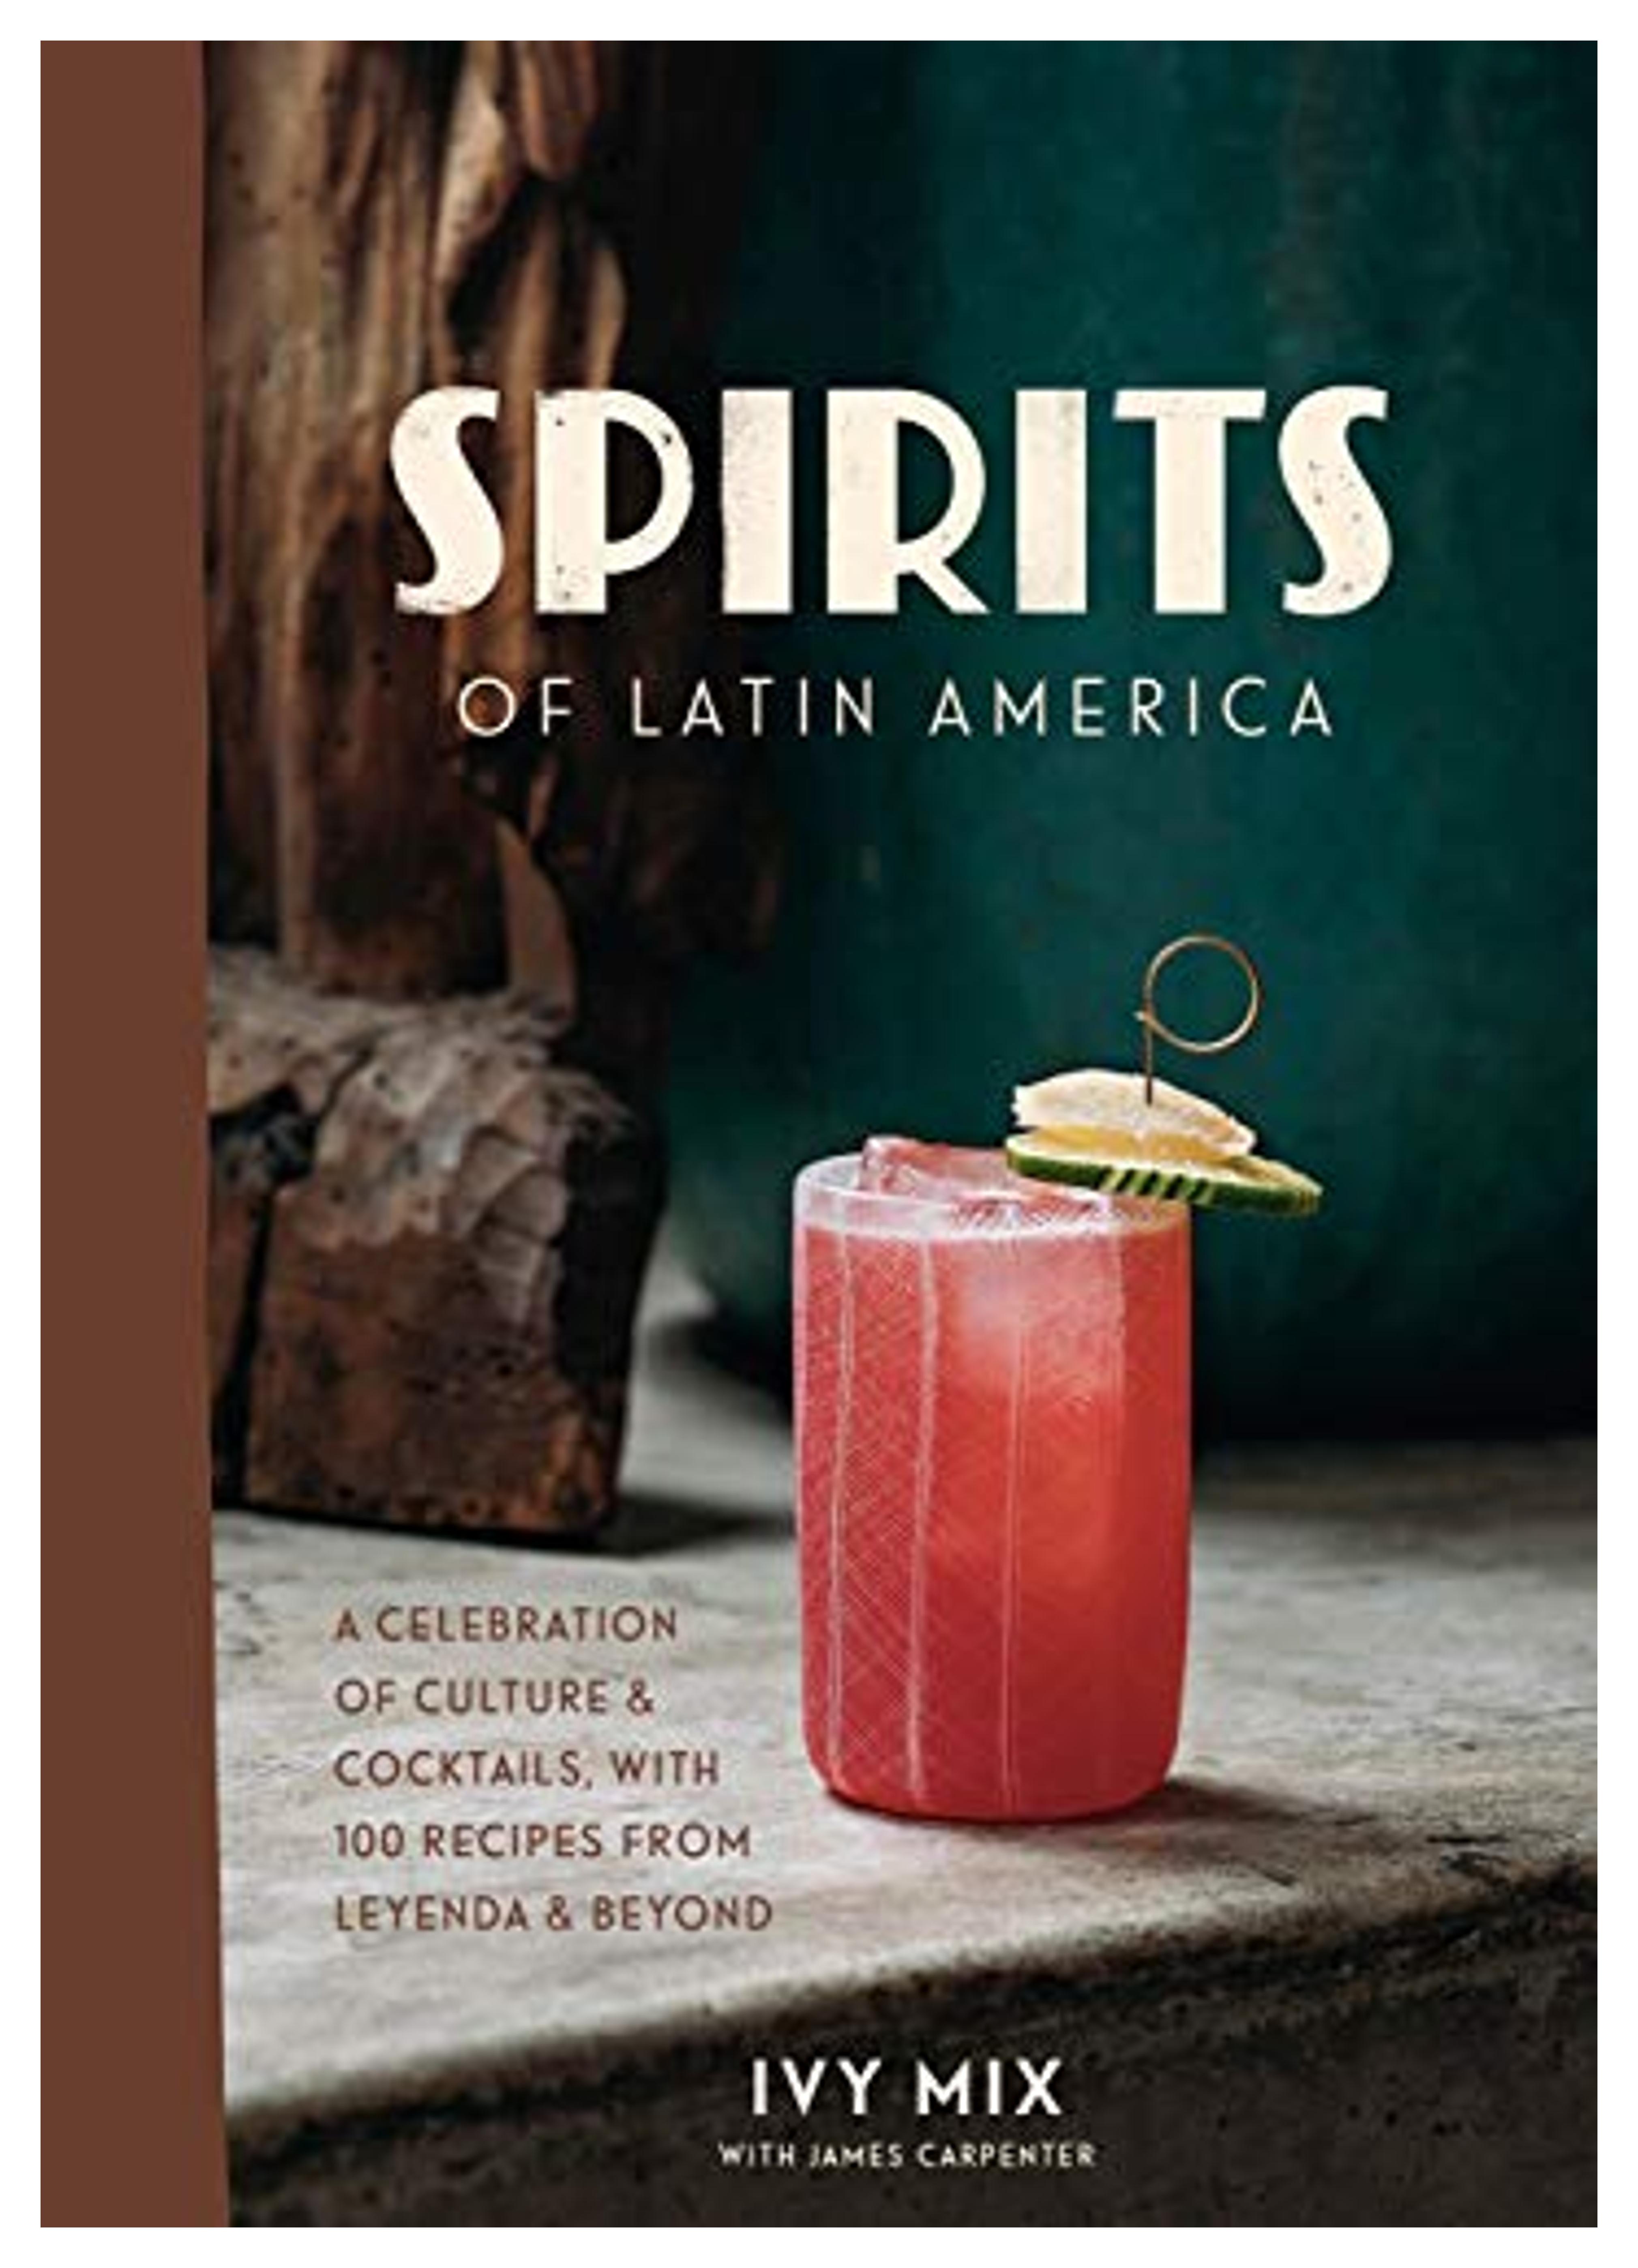 Spirits of Latin America: A Celebration of Culture & Cocktails, with 100 Recipes from Leyenda & Beyond: Mix, Ivy: 9780399582875: Amazon.com: Books